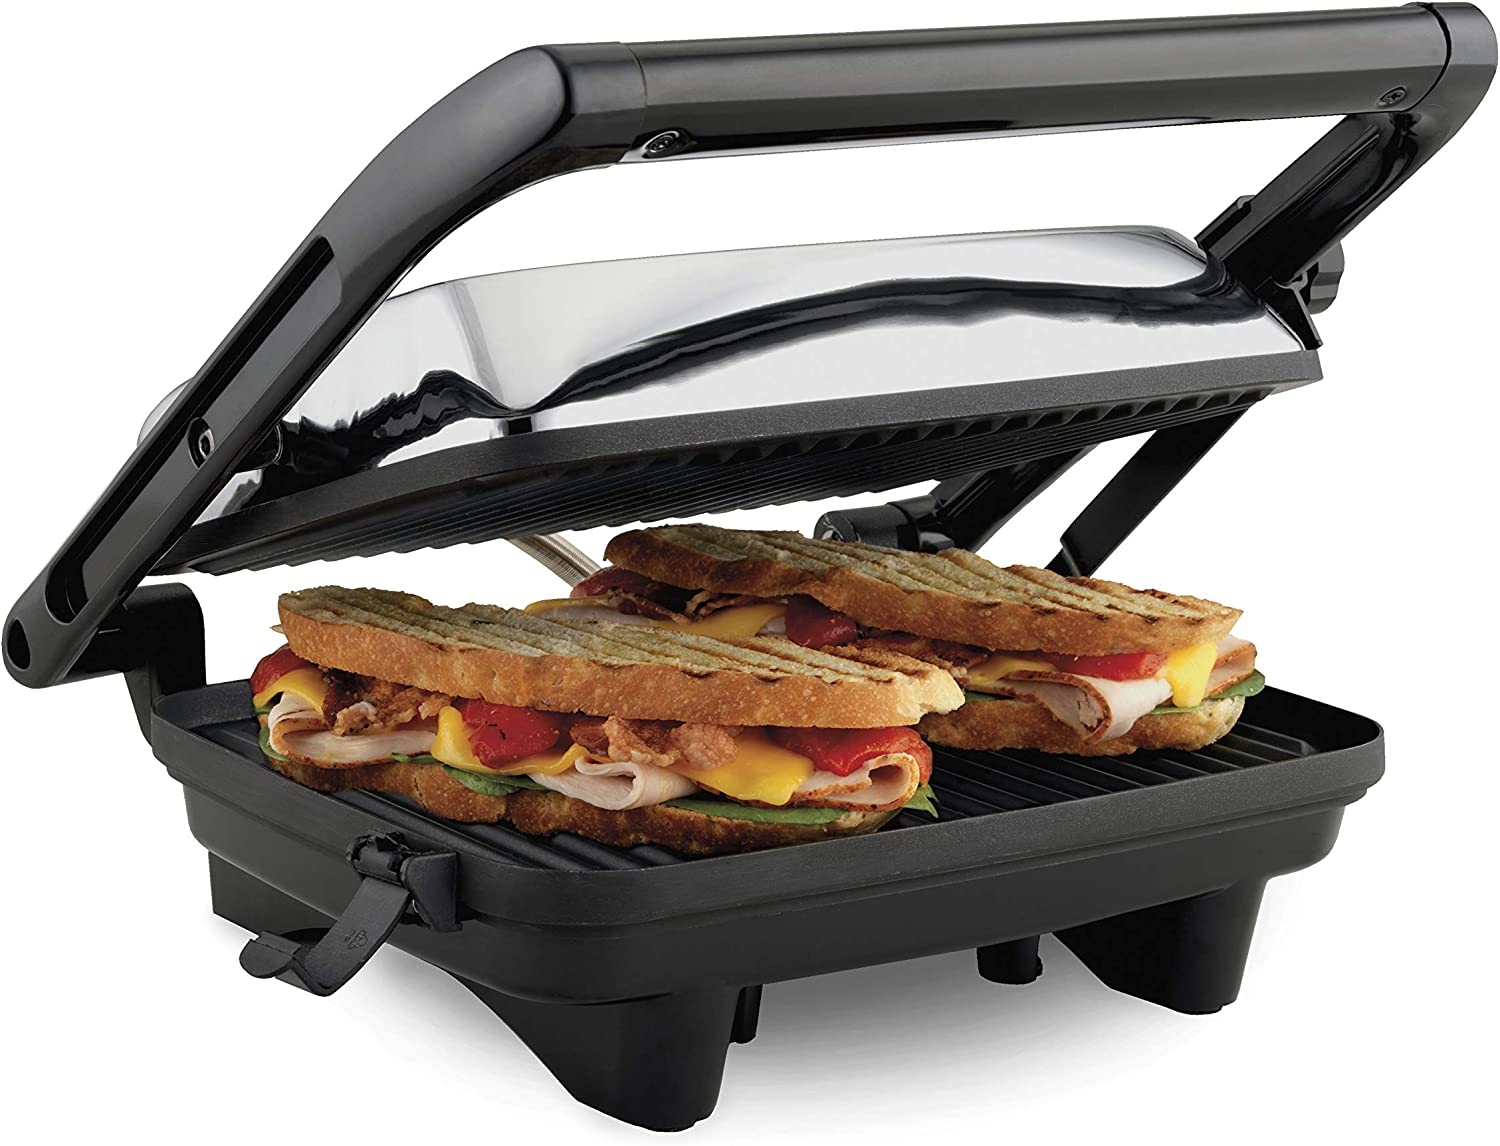 Hamilton Beach Electric Panini Press Grill with Locking Lid, Opens 180 Degrees for any Sandwich Thickness (25460A) Nonstick 8″ X